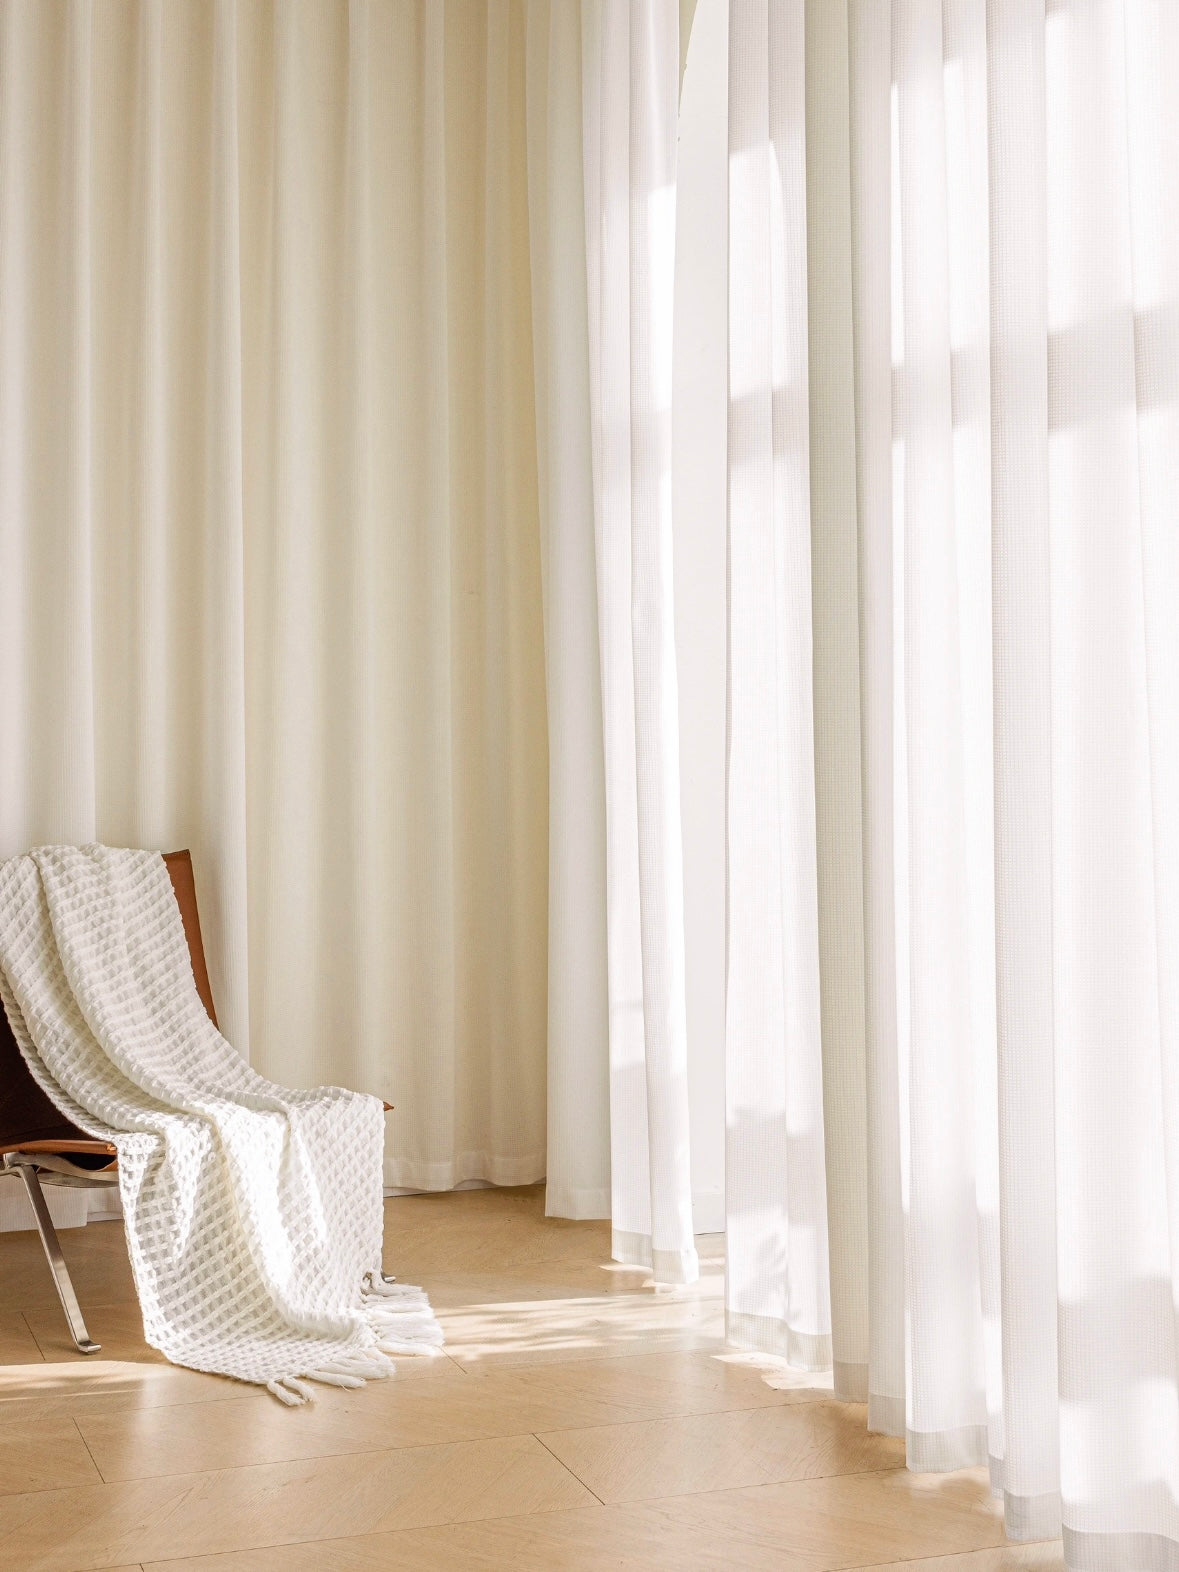 Cozy interior setup with floor-to-ceiling sheer white curtains by EaseEaseCurtains, wooden chair and white blanket in sunlight, symbolizing tranquility and ethereal home decor